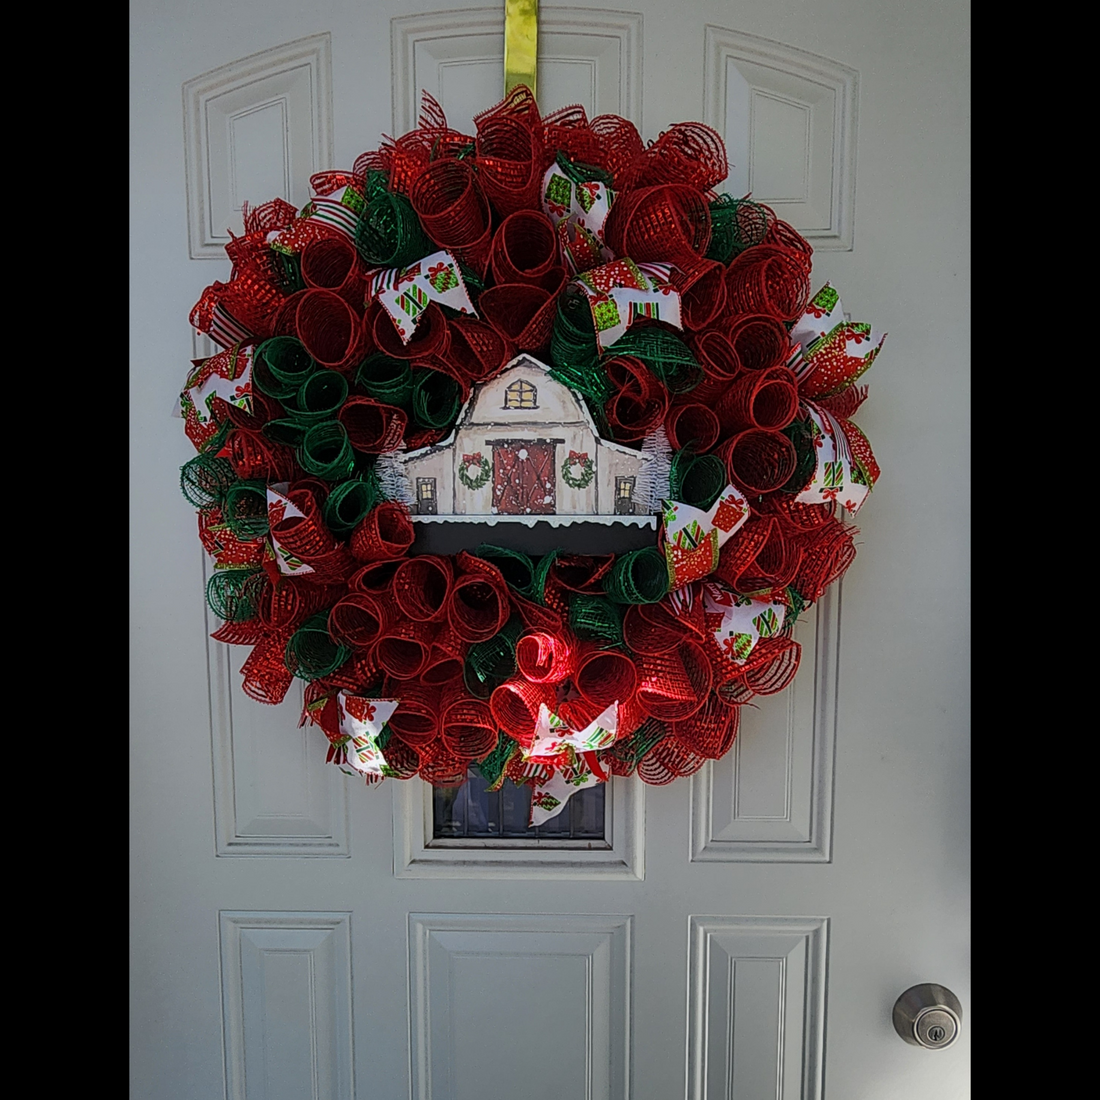 Crafting Up a Merry Christmas: Preparing for Wreath-Making Magic